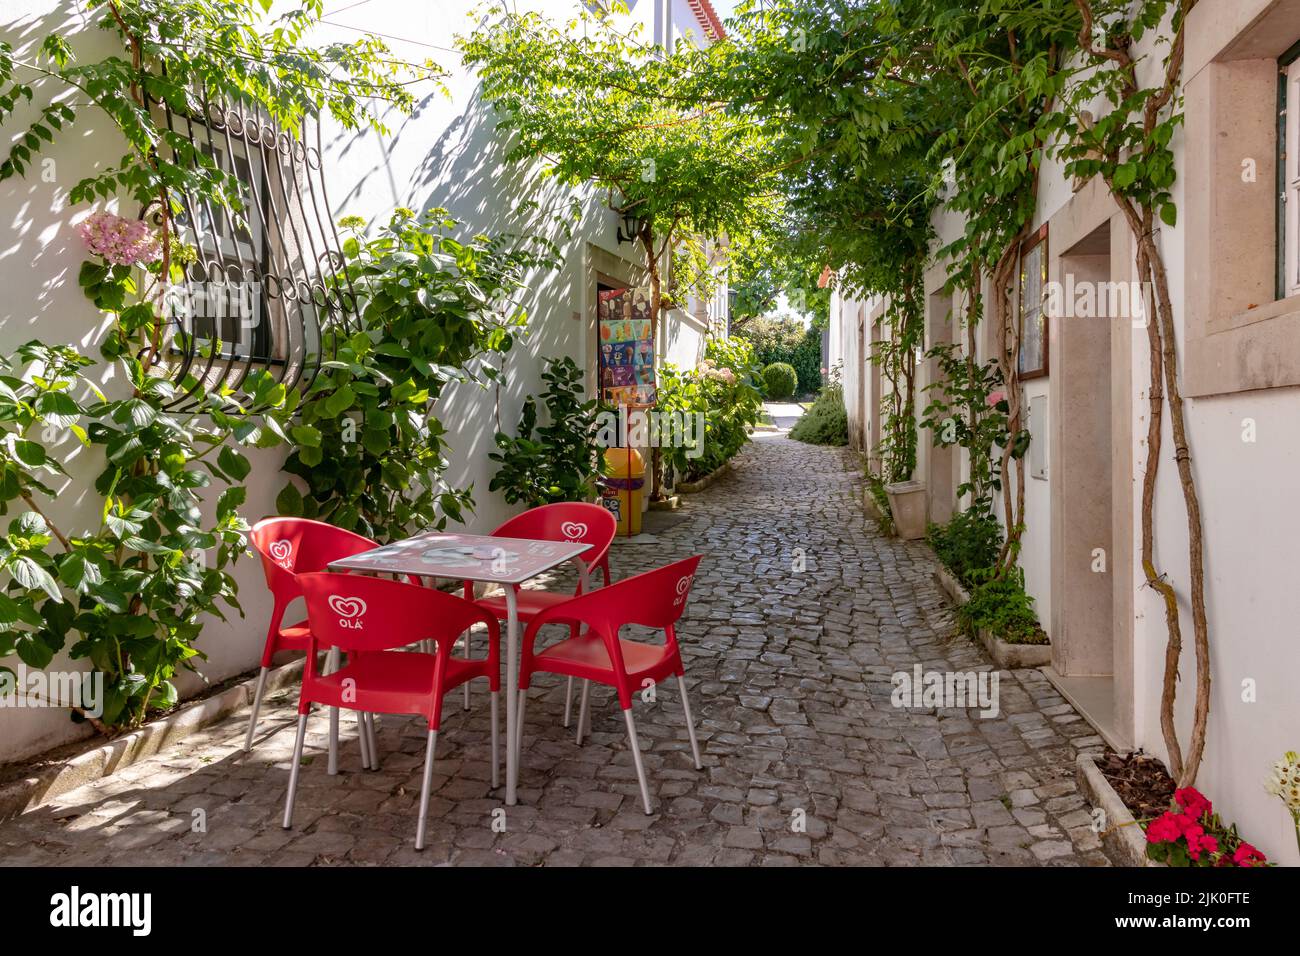 Picturesque alley with chairs and a cafe in the old town of the upper town of Ourem in Portugal Stock Photo